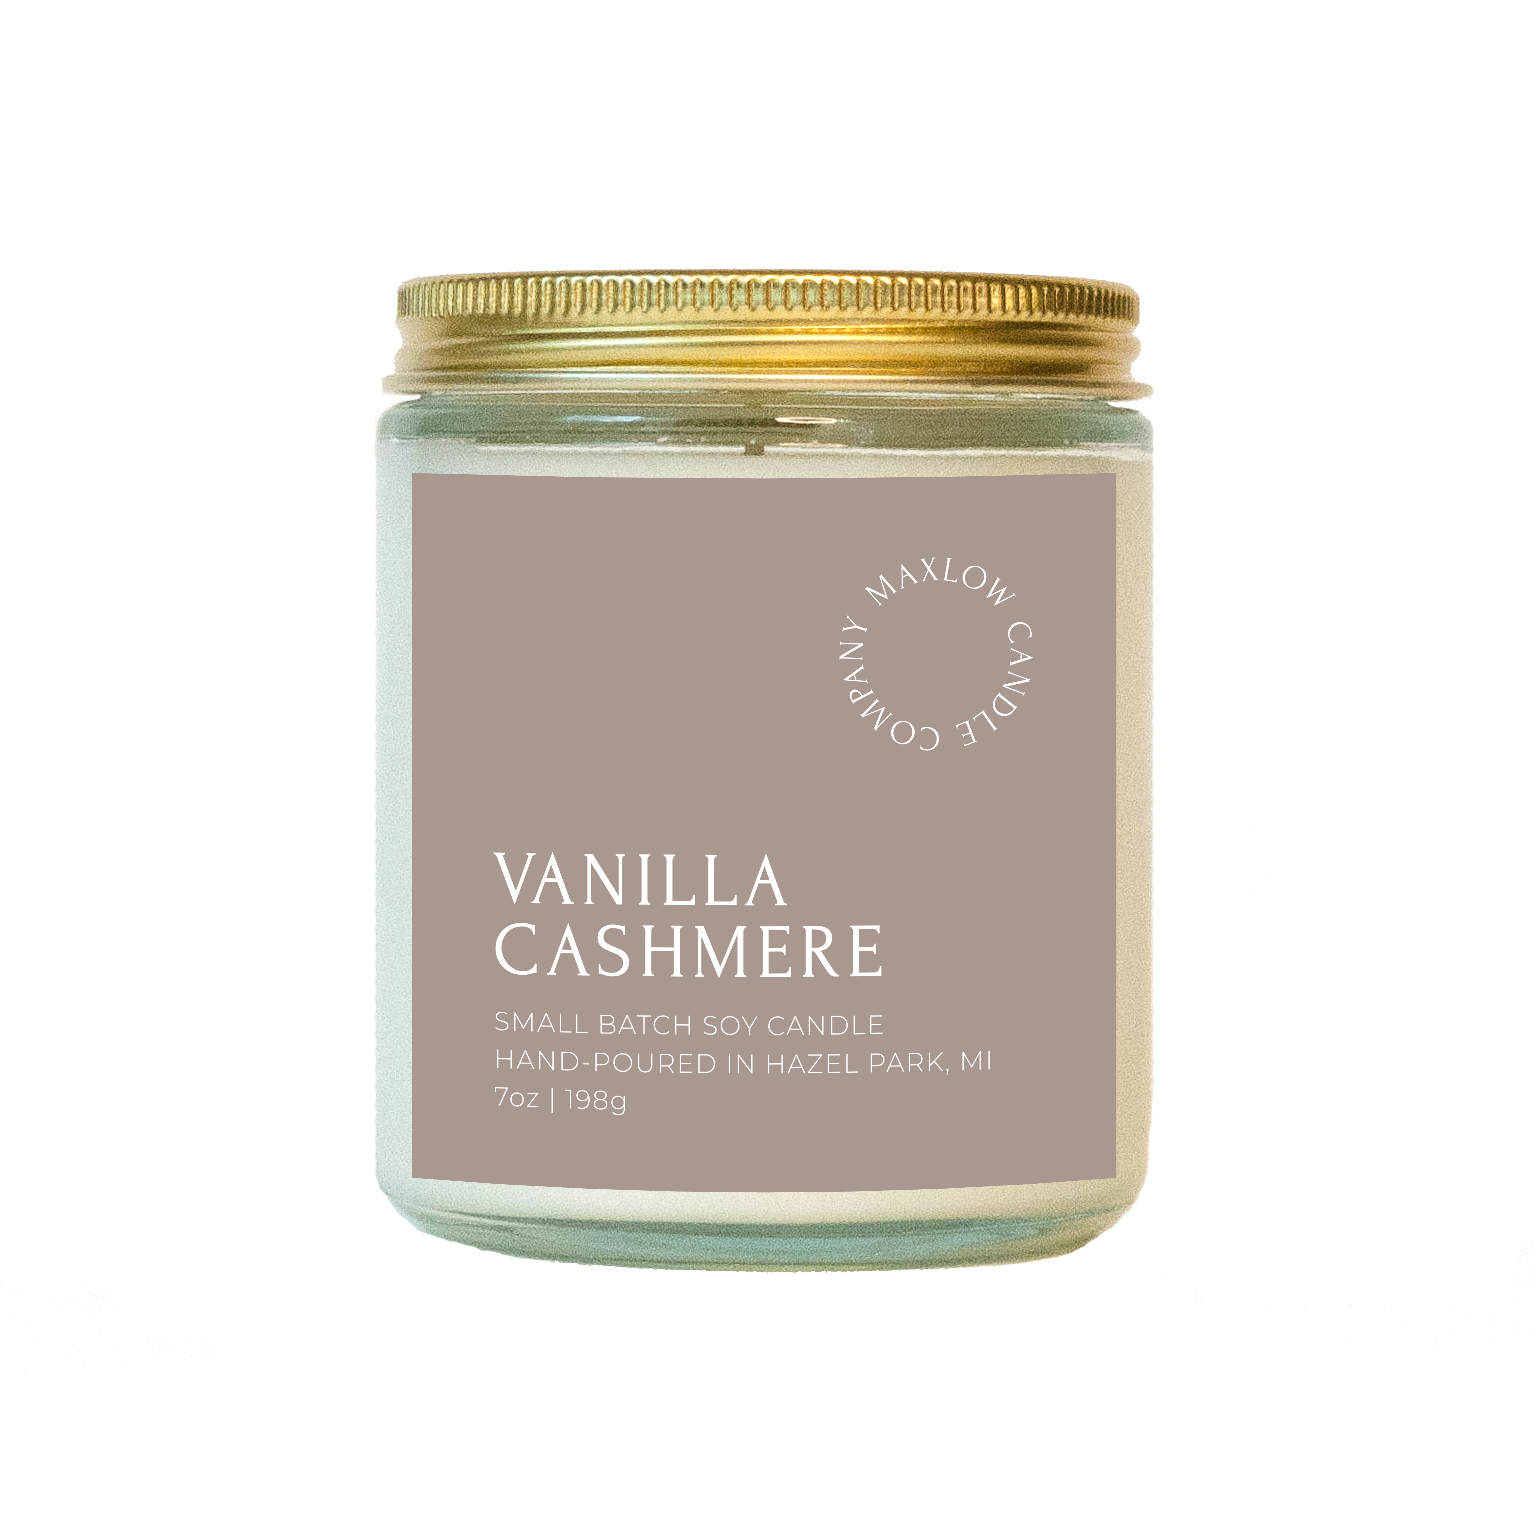 Vanilla Cashmere - 7oz Soy Candle